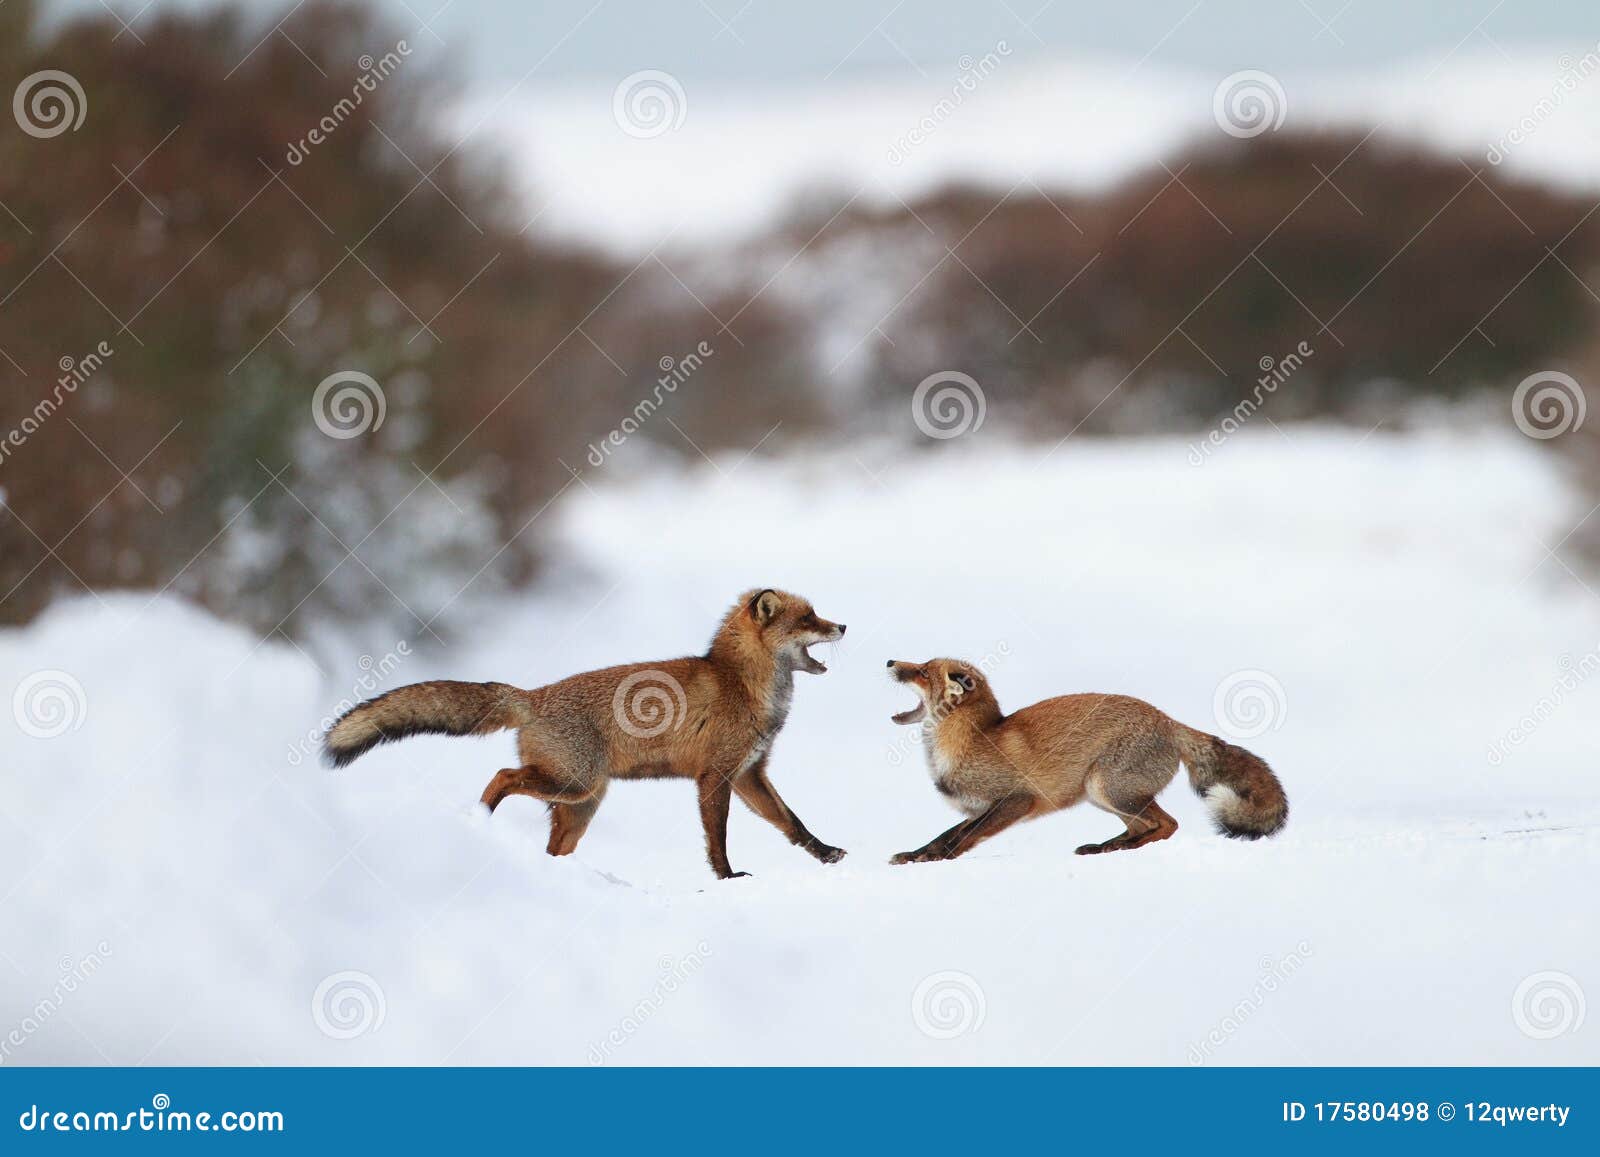 fighting foxes